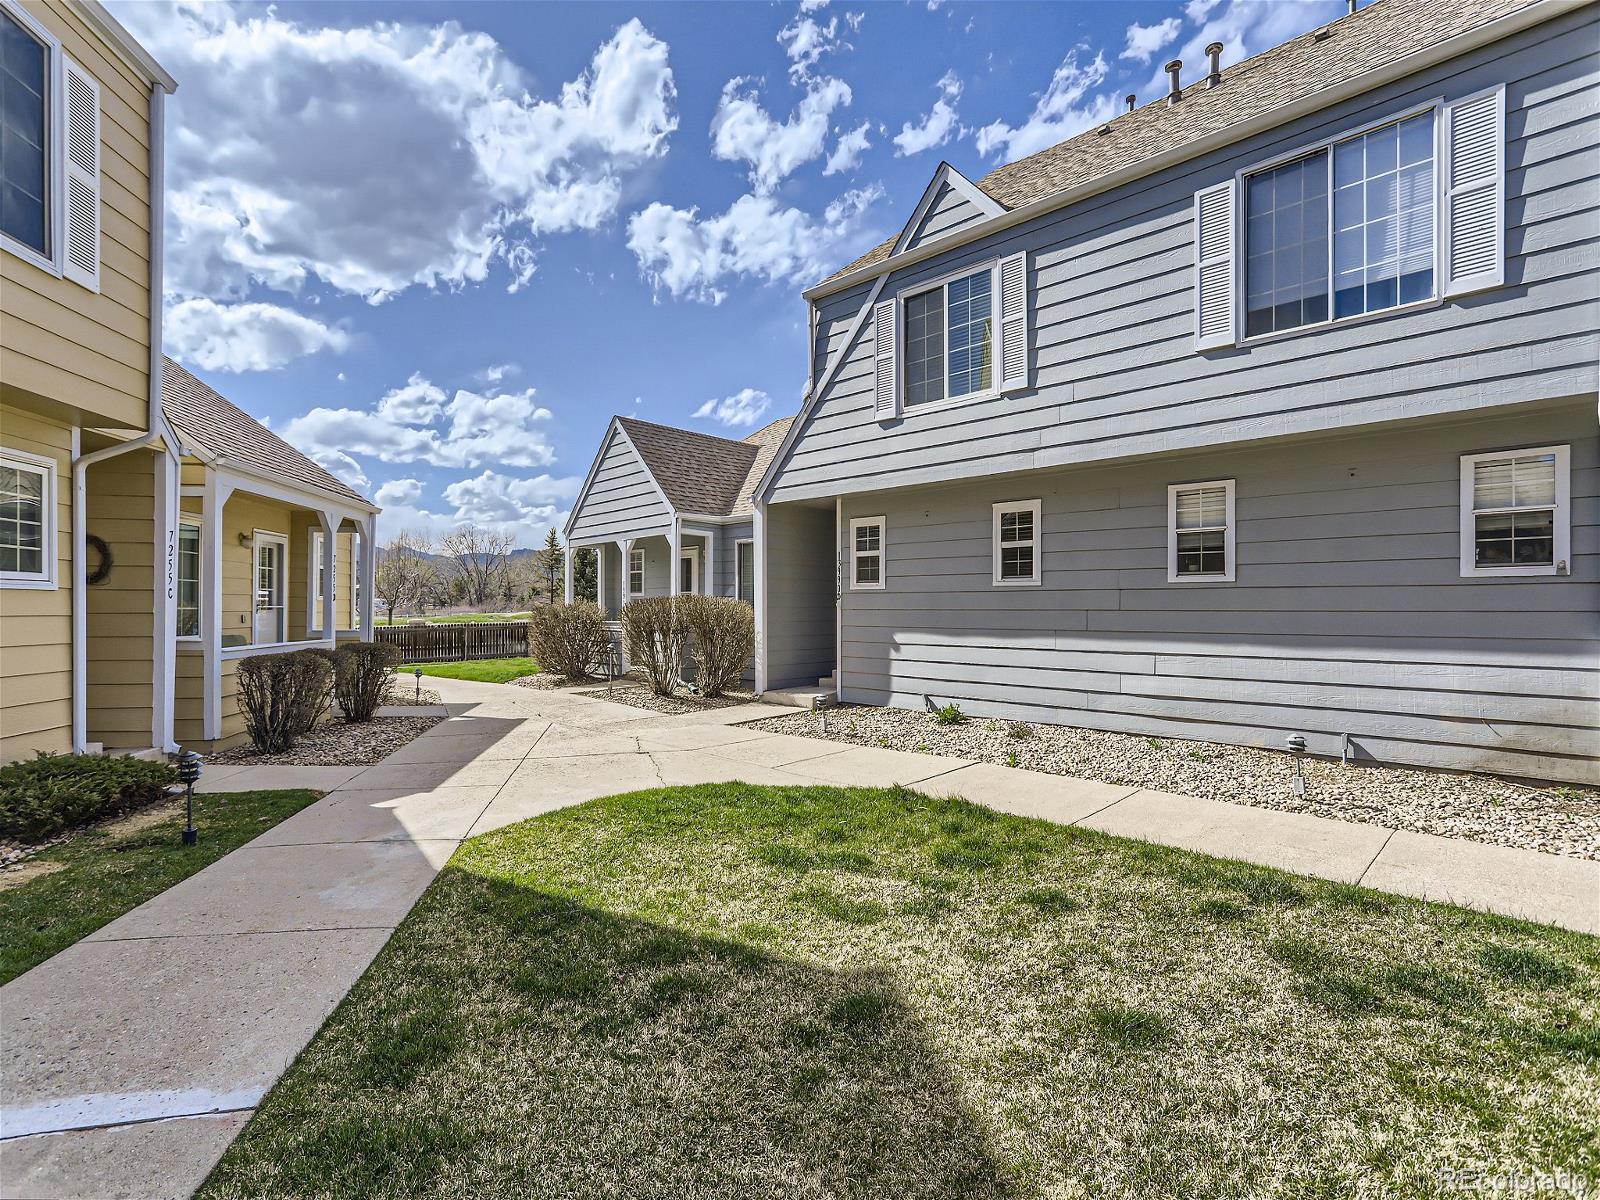 13990 W 72nd Place D, Arvada  MLS: 5591640 Beds: 2 Baths: 2 Price: $375,000